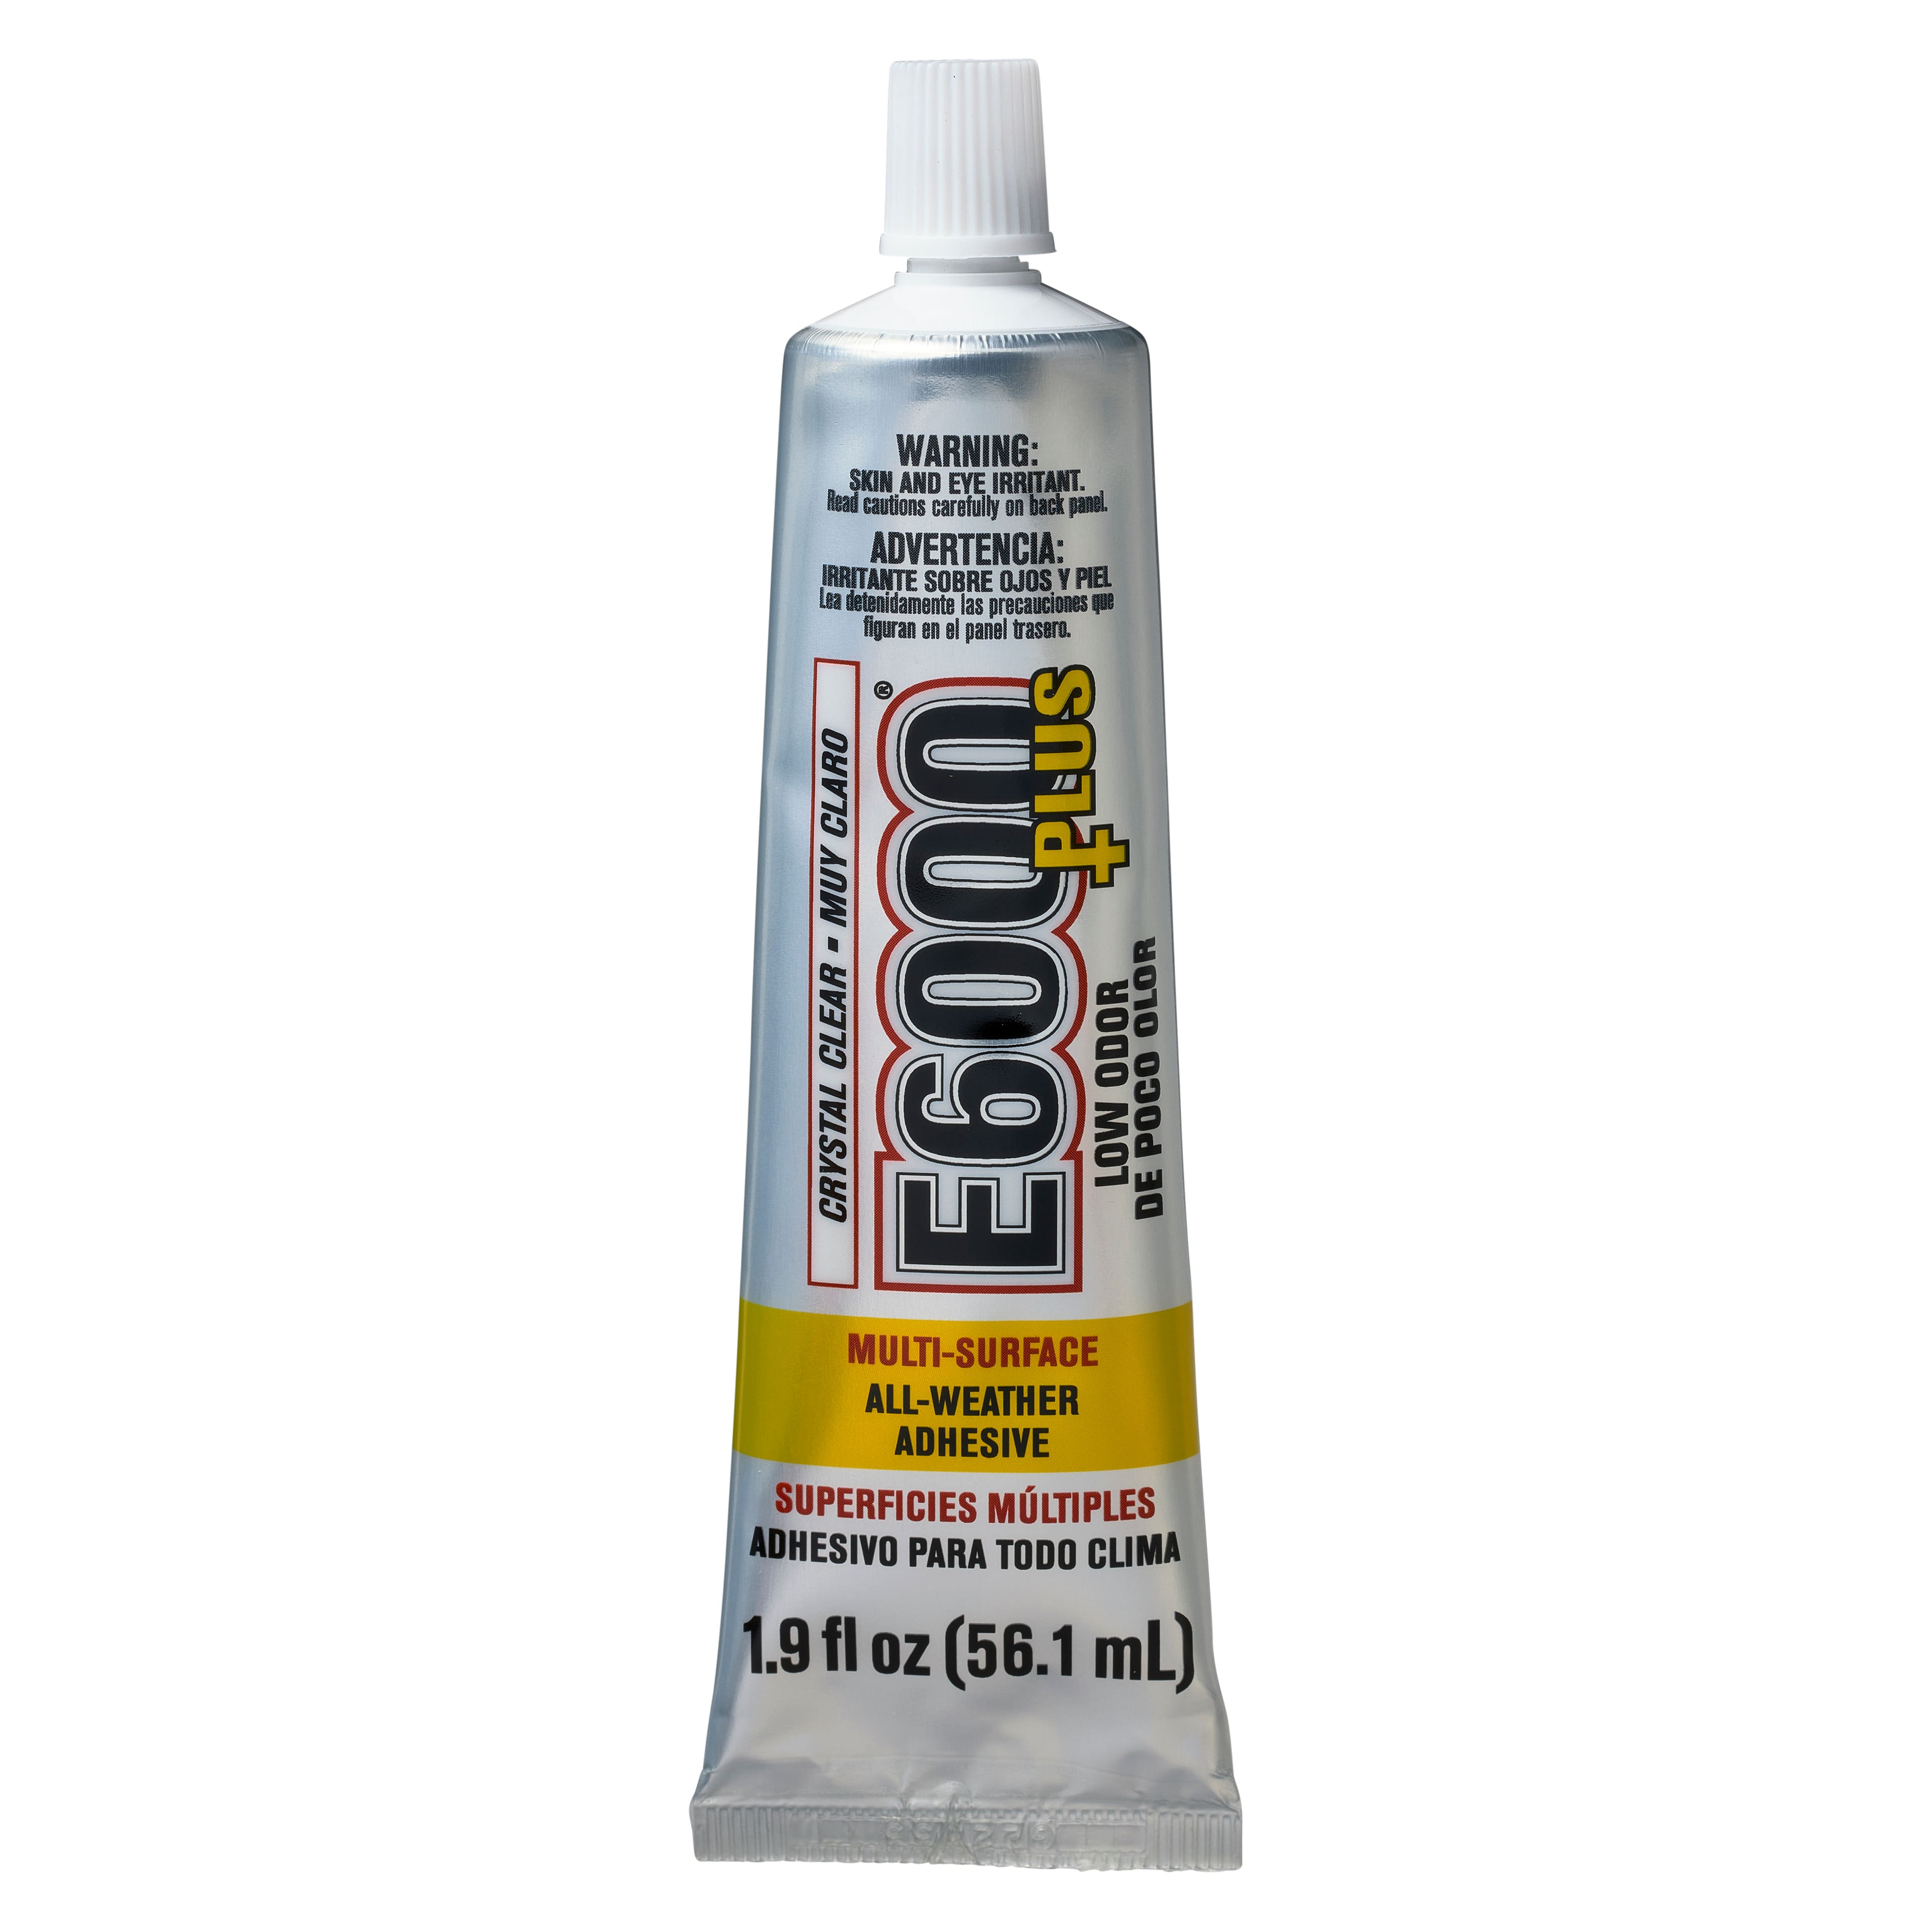 E6000&#xAE; Plus Crystal Clear All-Weather Adhesive